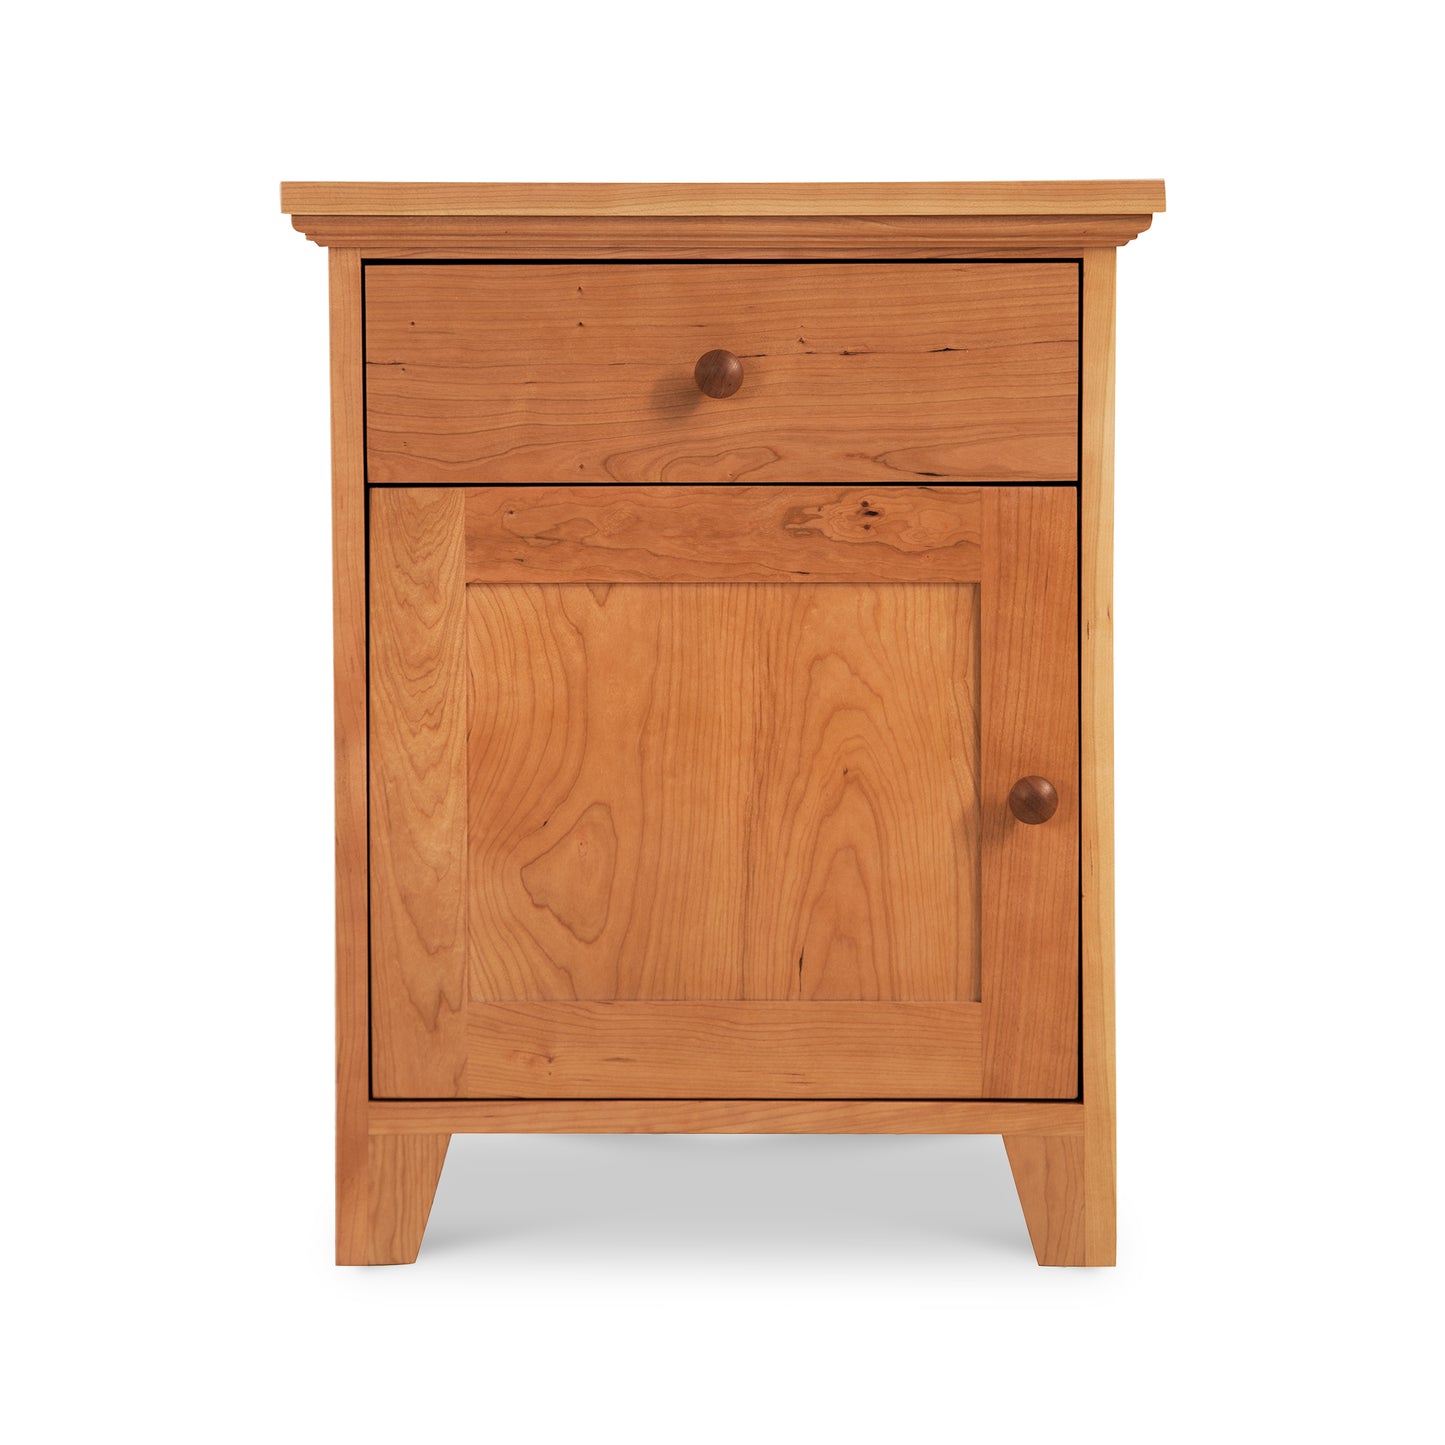 An American Country 1-Drawer Nightstand with Door, inspired by the countryside, made by Lyndon Furniture.